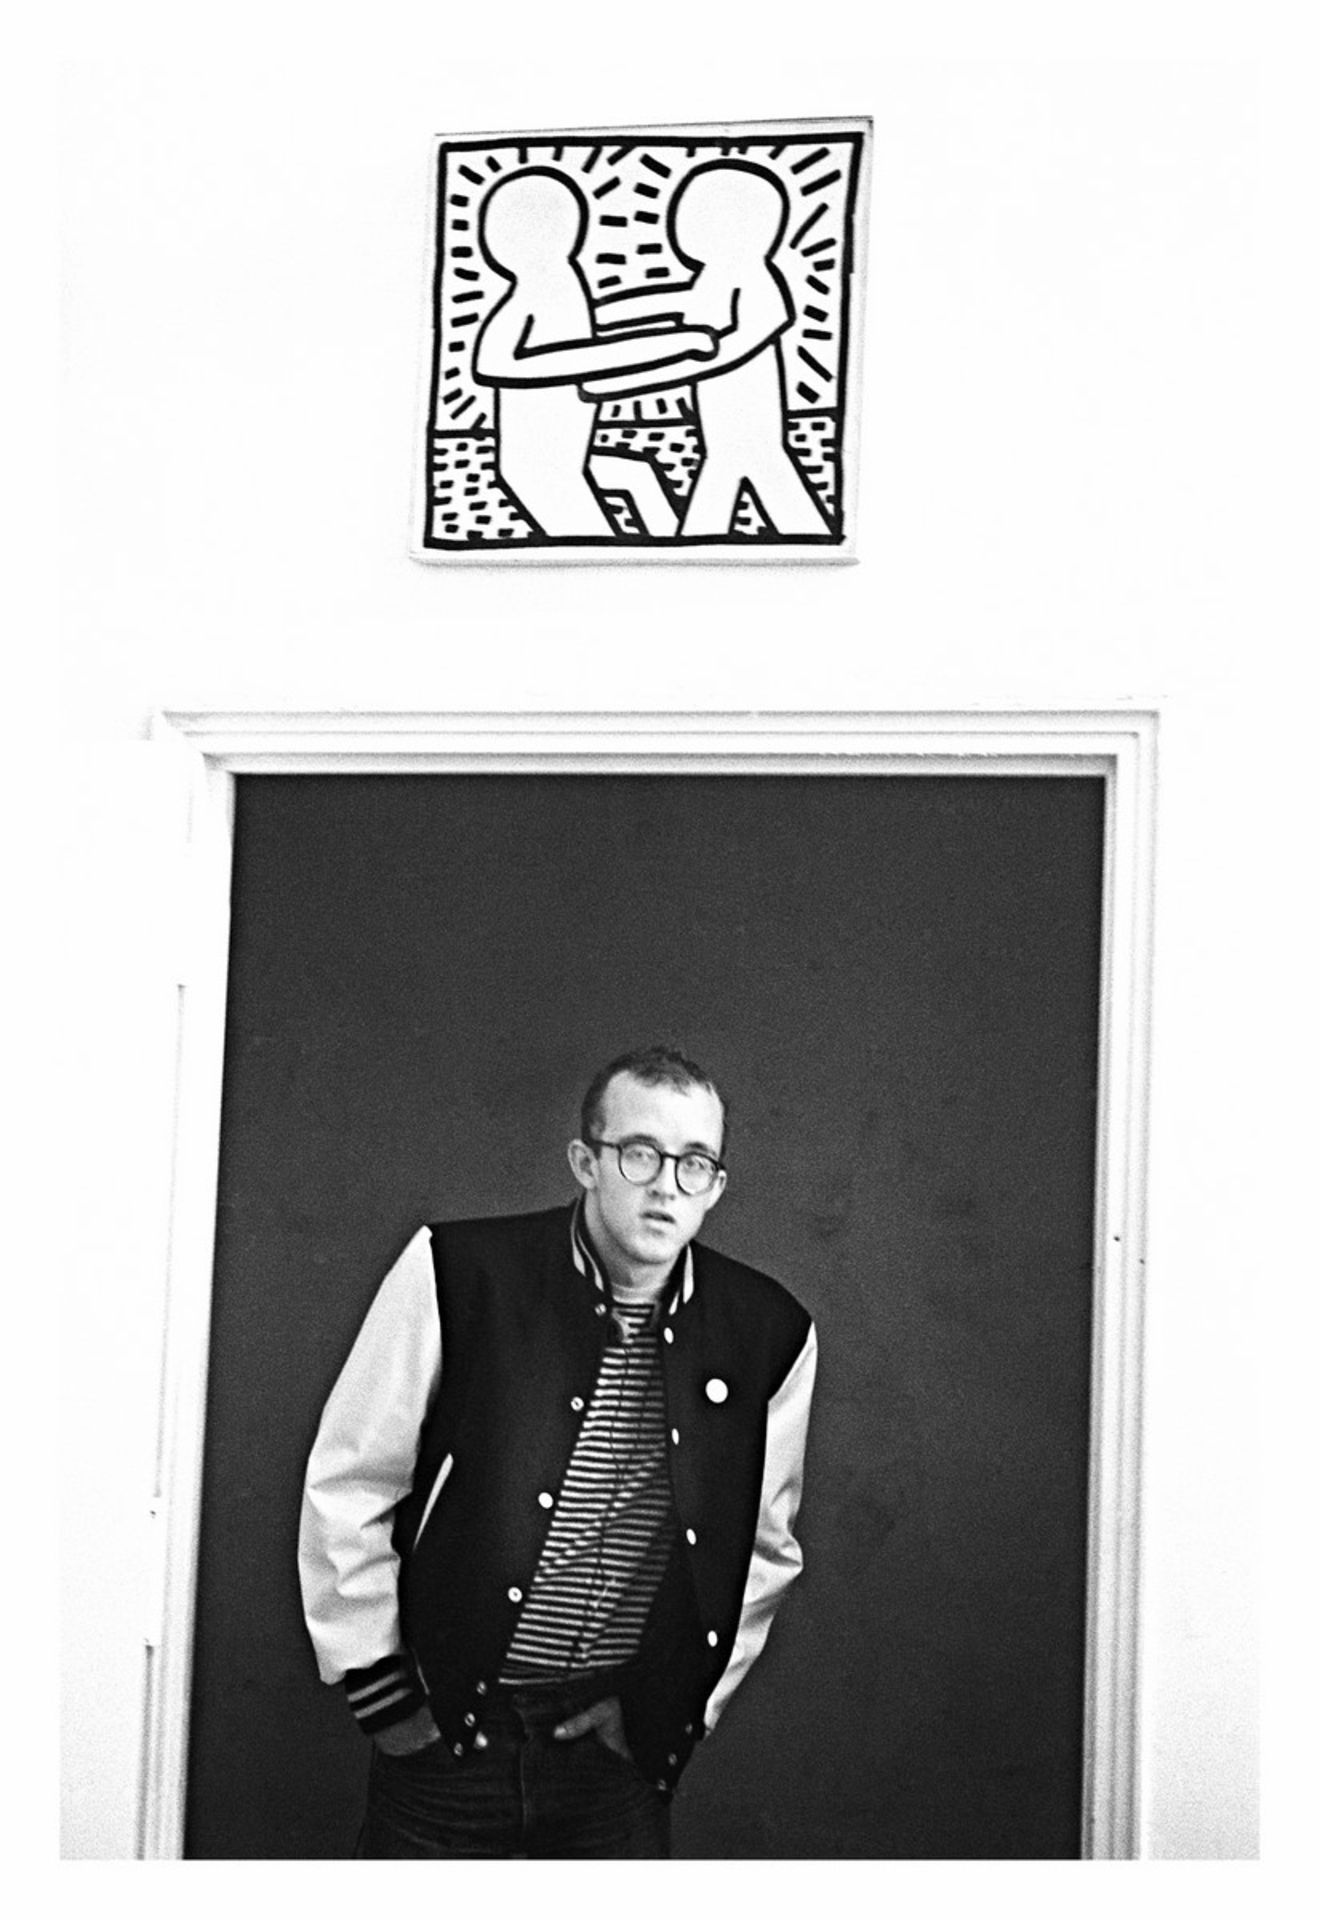 Pierre HOULES (1945-1986) - Keith Haring, Cannes - Tirage argentique d’exposition [...]